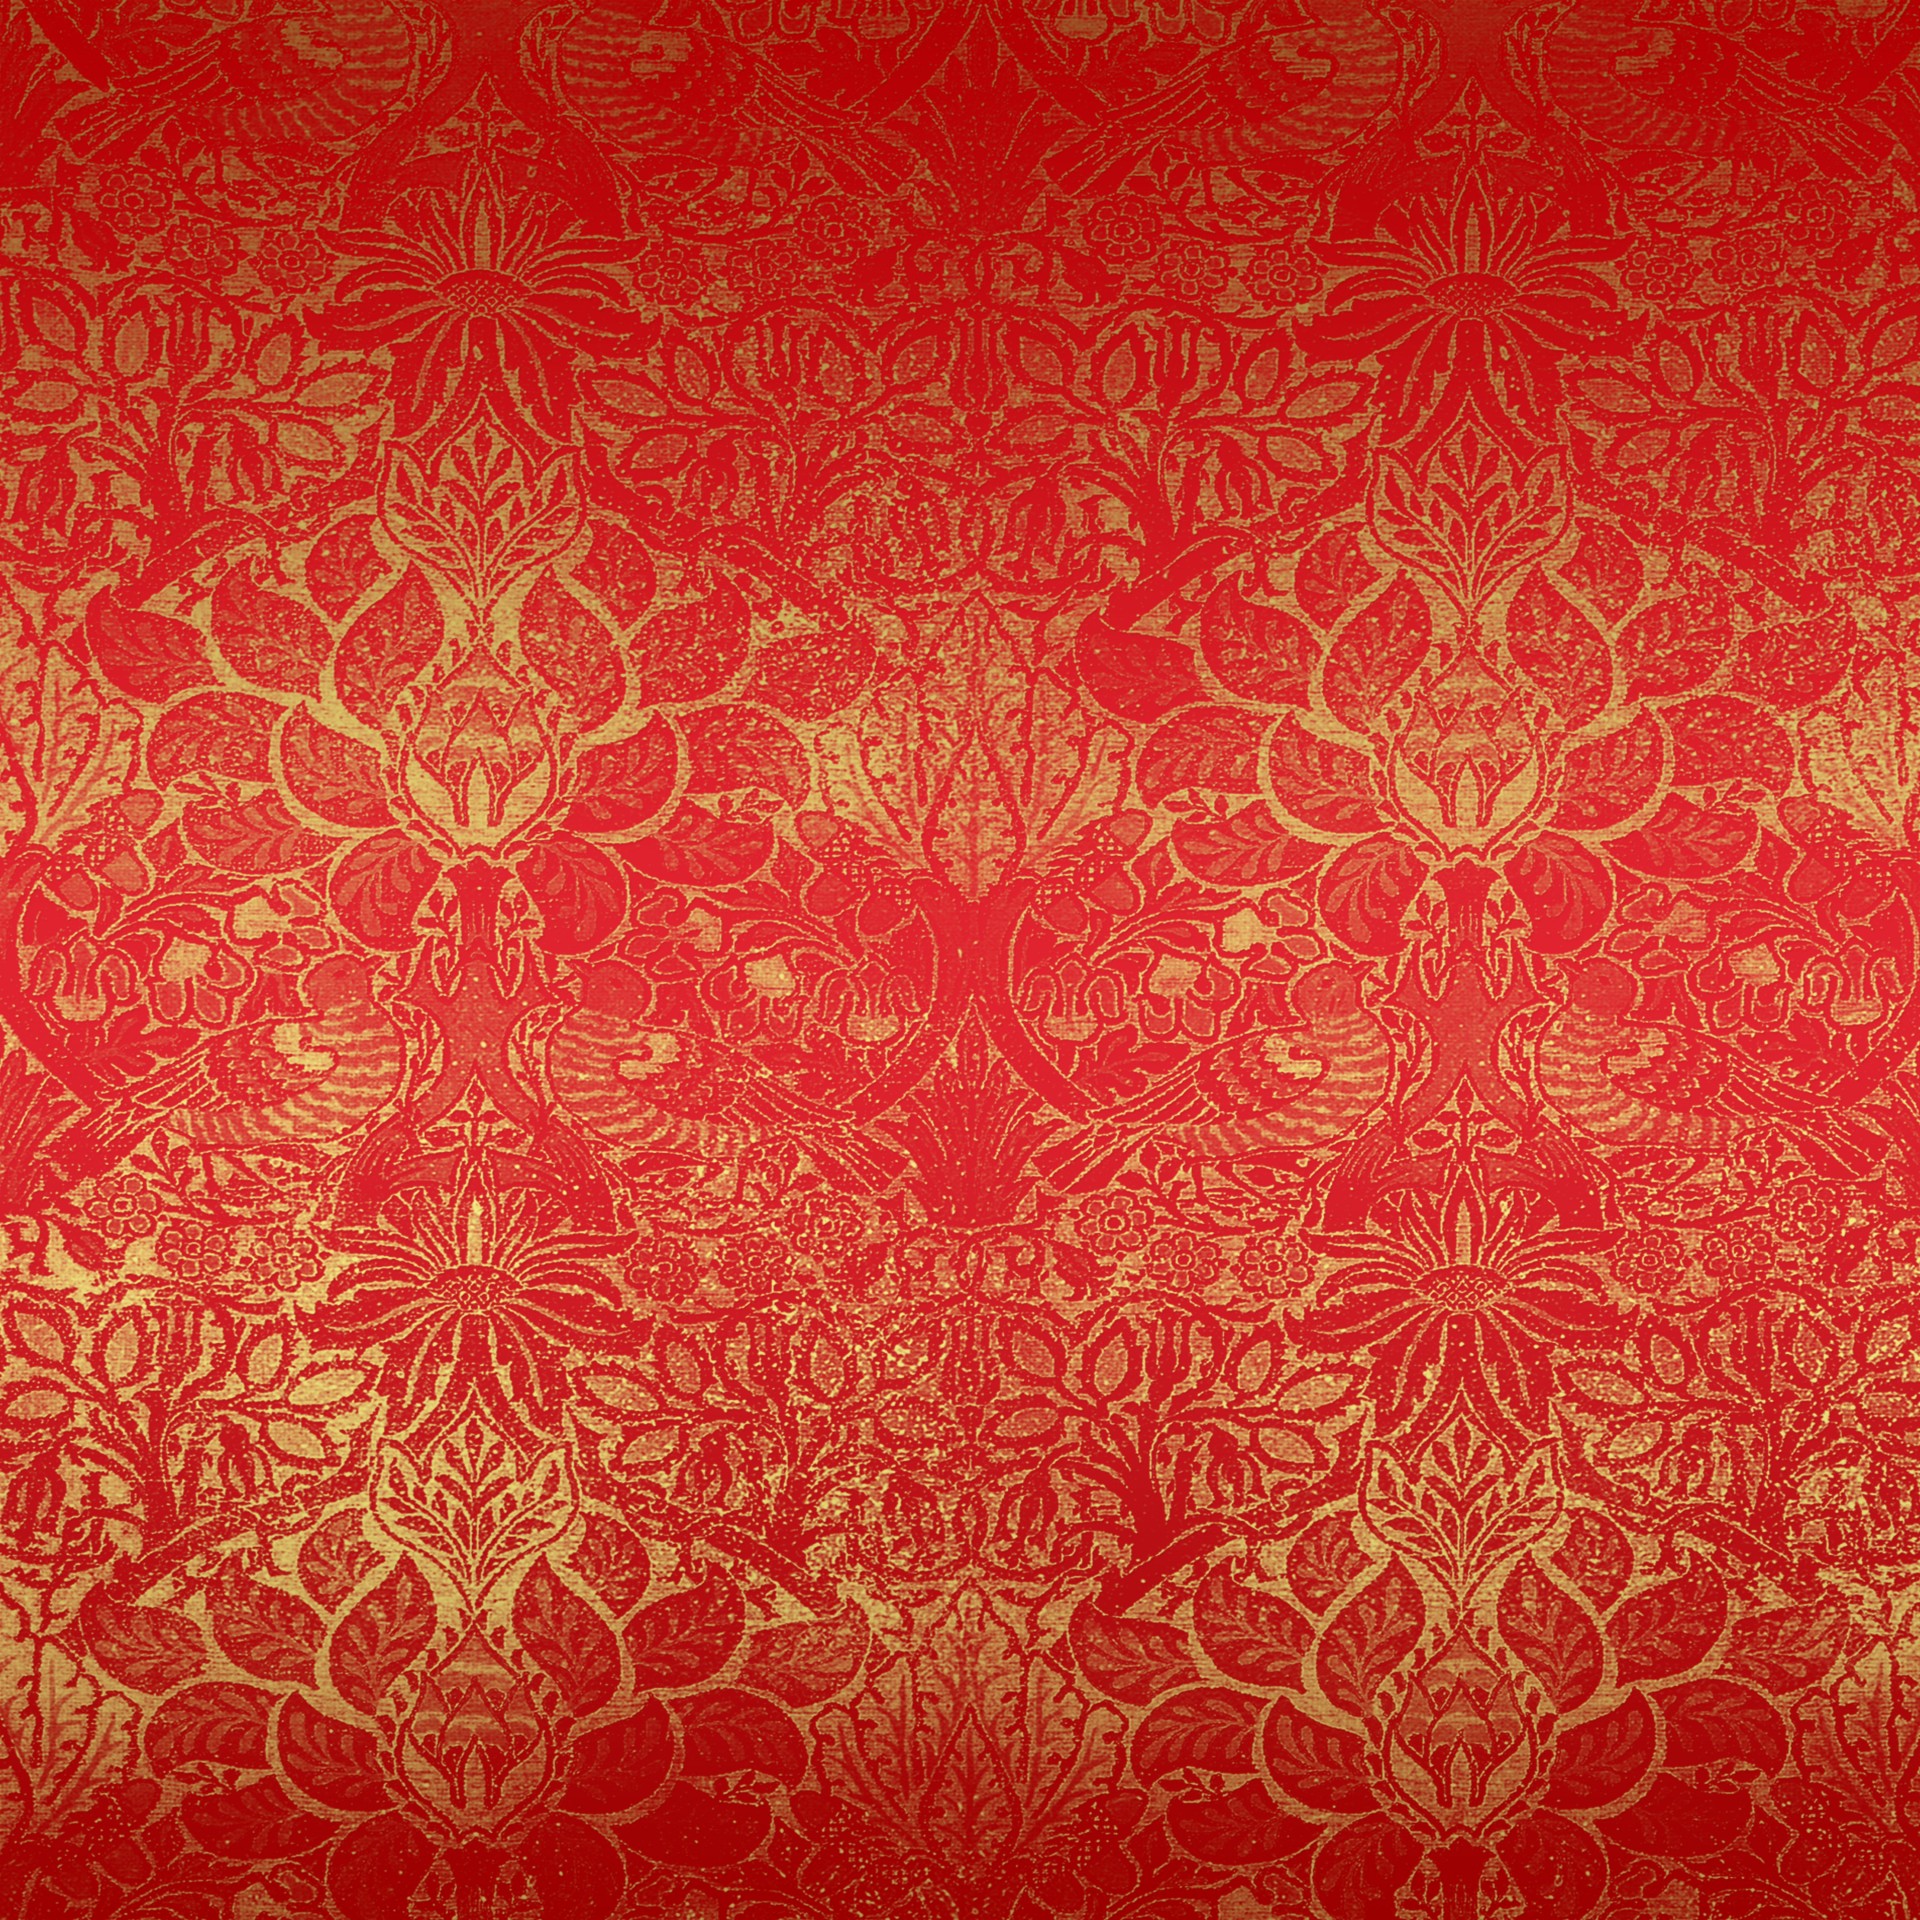 Grunge Floral Red And Gold Effect